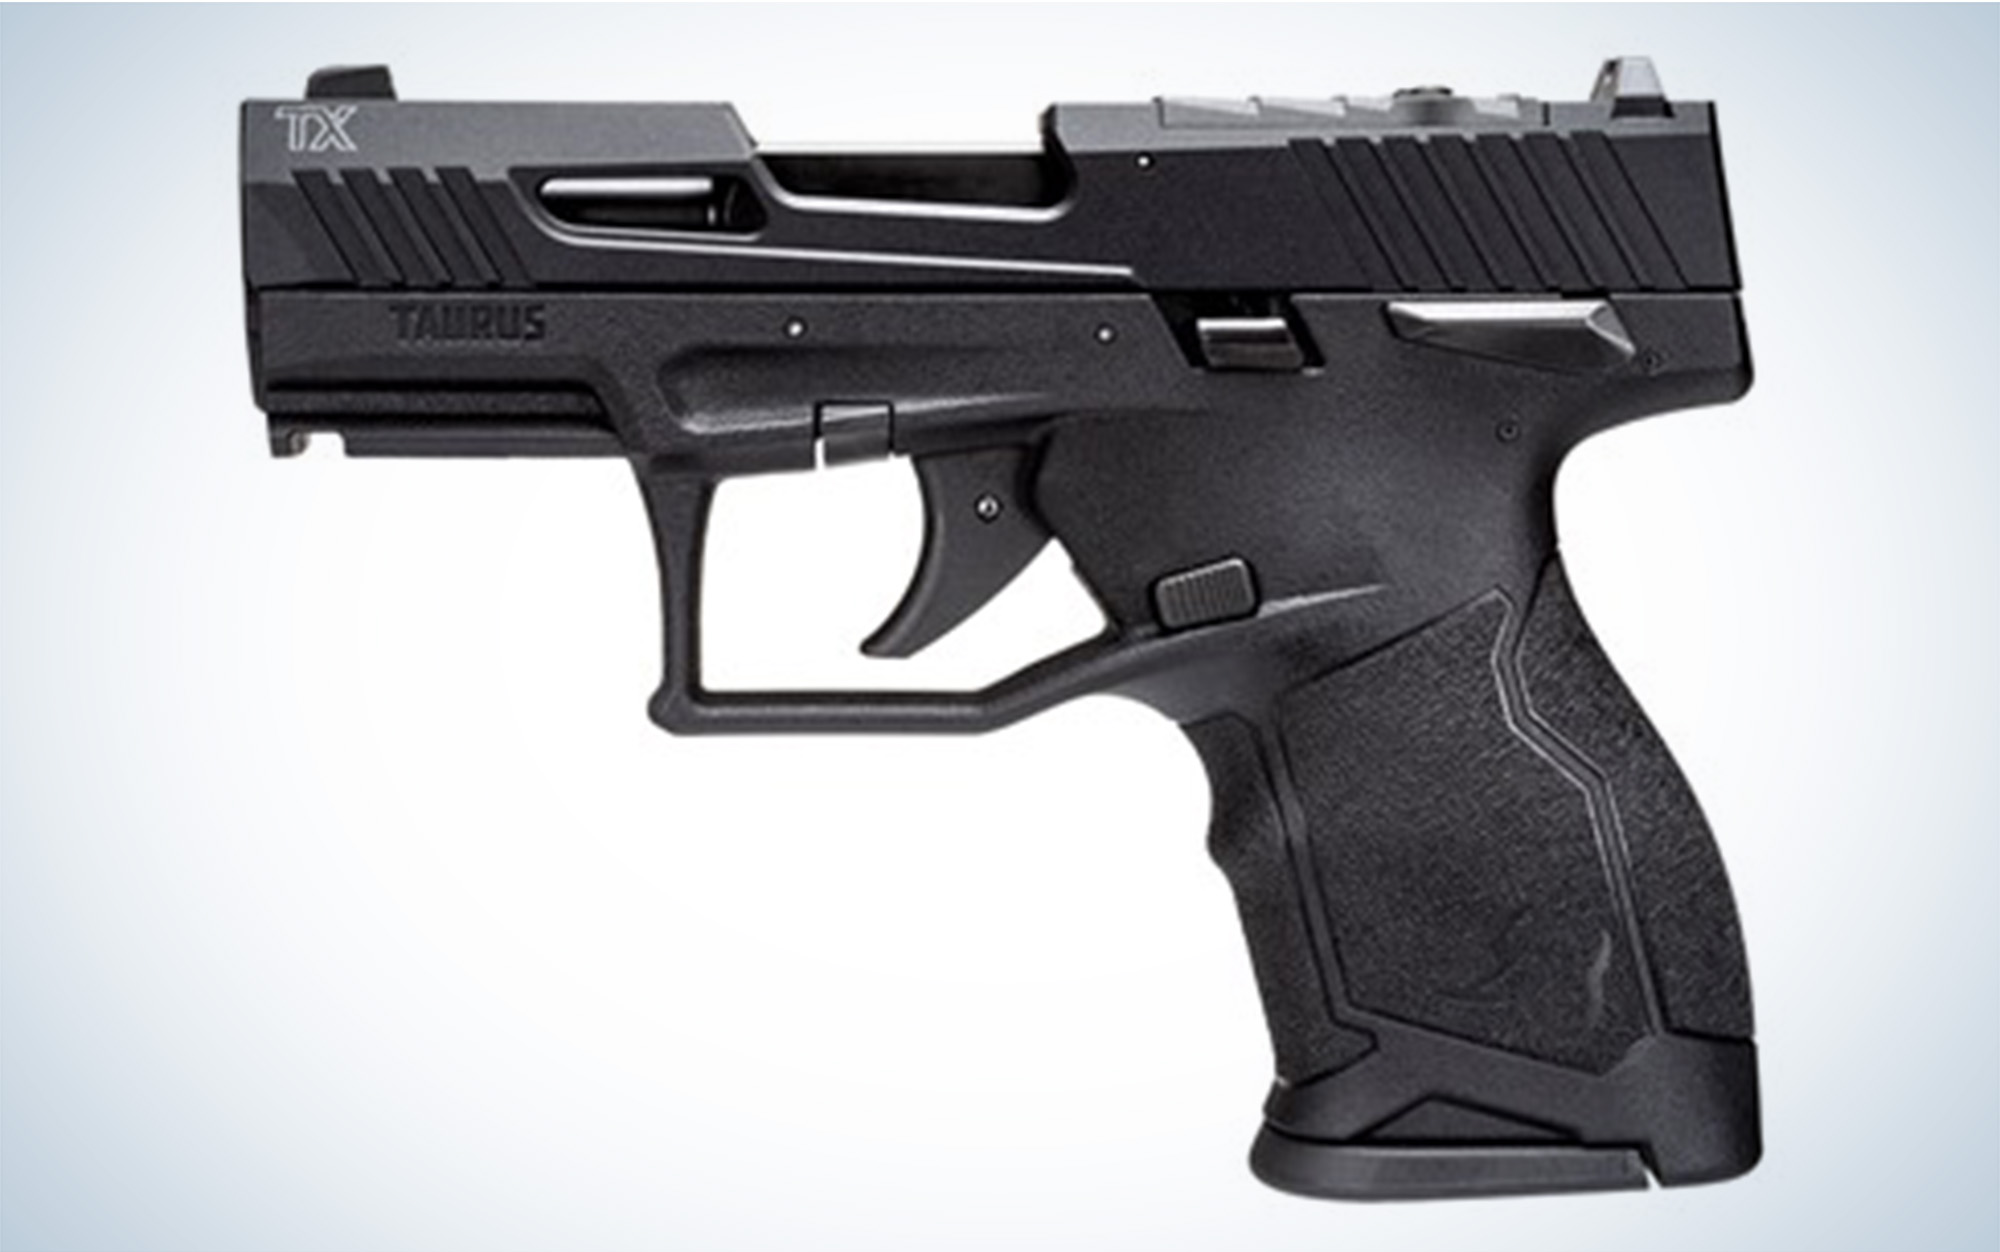 The Taurus TX 22 Compact is one of the new handguns from SHOT Show 2023.